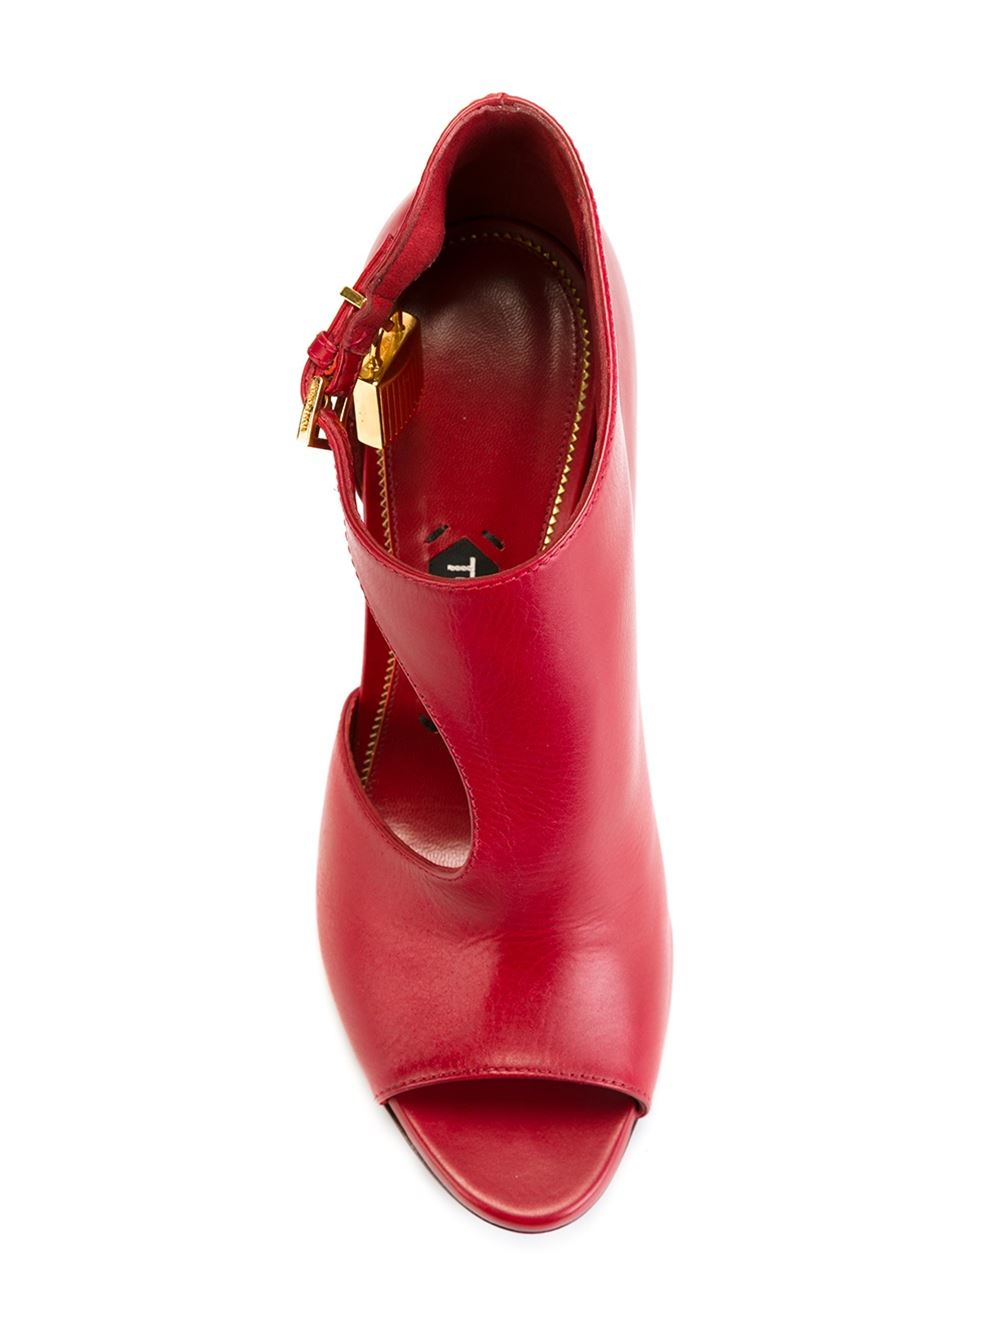 Tom Ford Peep Toe Cut-out Stiletto Boots in Red - Lyst